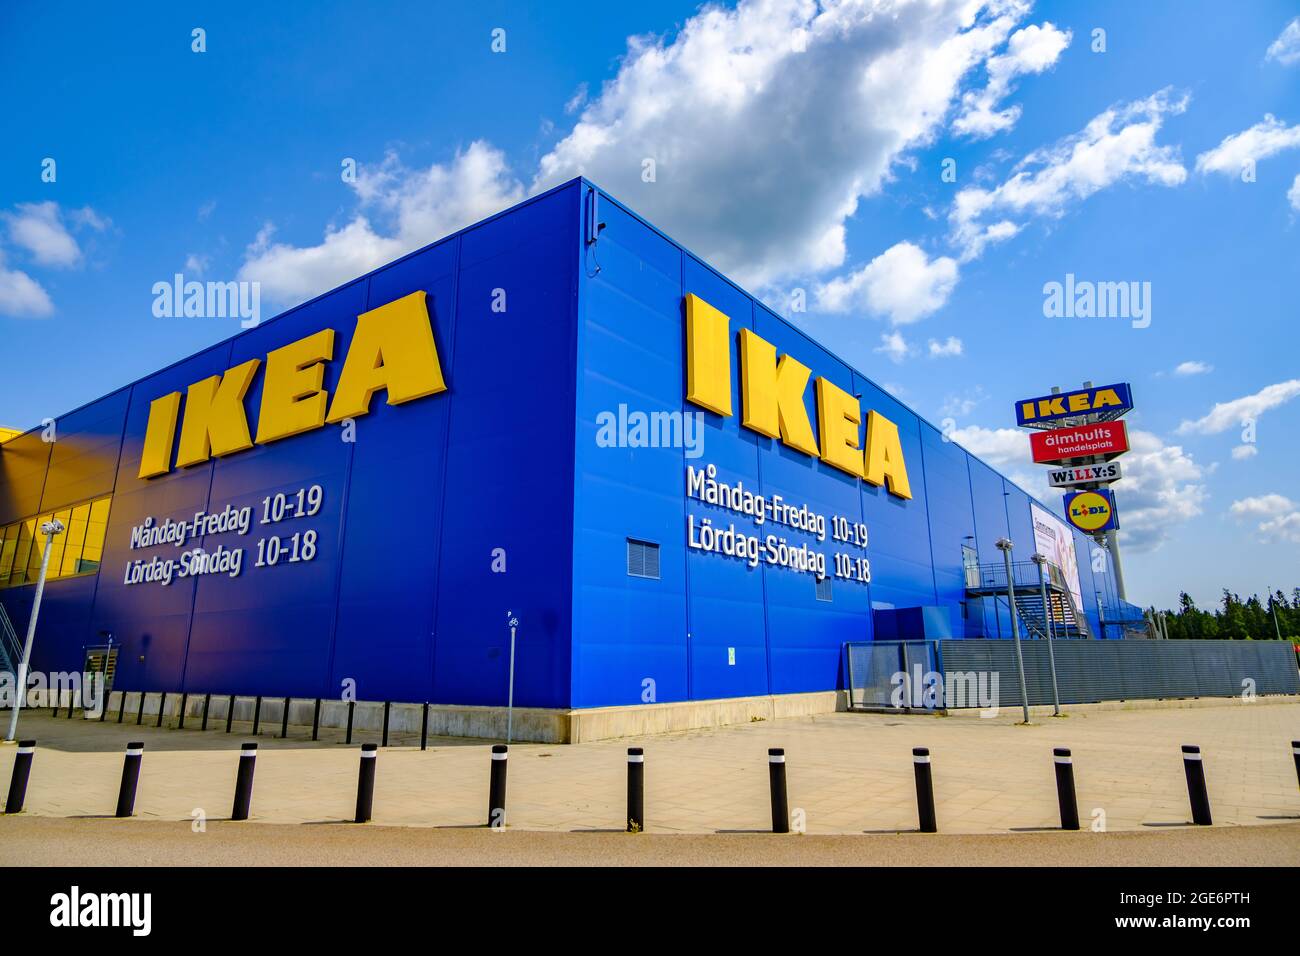 aelmhult, sweden, 24 july 2021, ikea store Stock Photo - Alamy